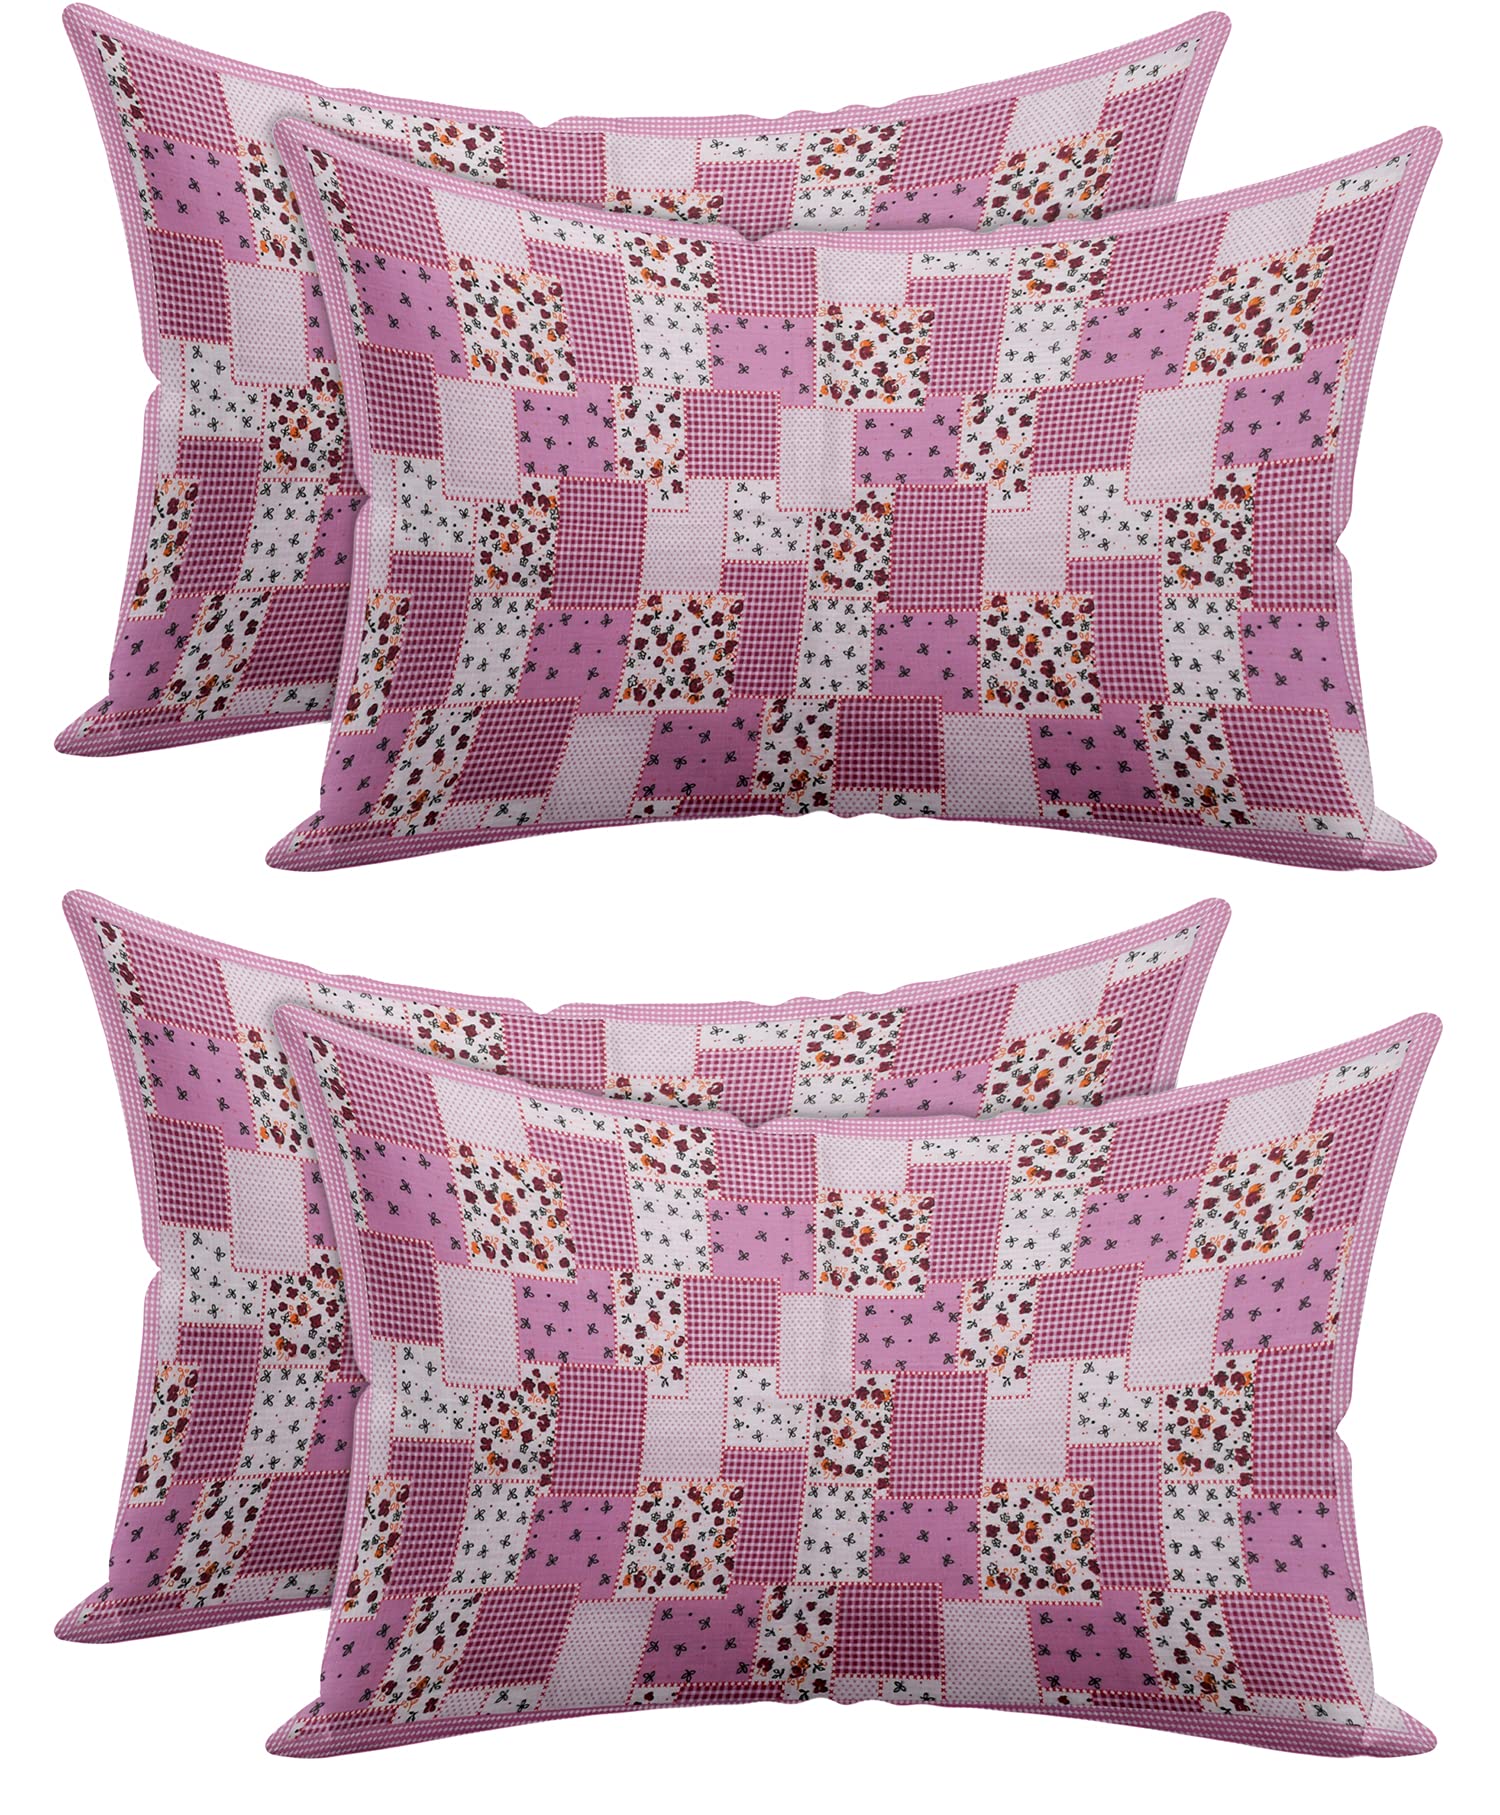 Kuber Industries Check Design Premium Cotton Pillow Covers, 18 x 28 inch, Set of 4 (Pink)